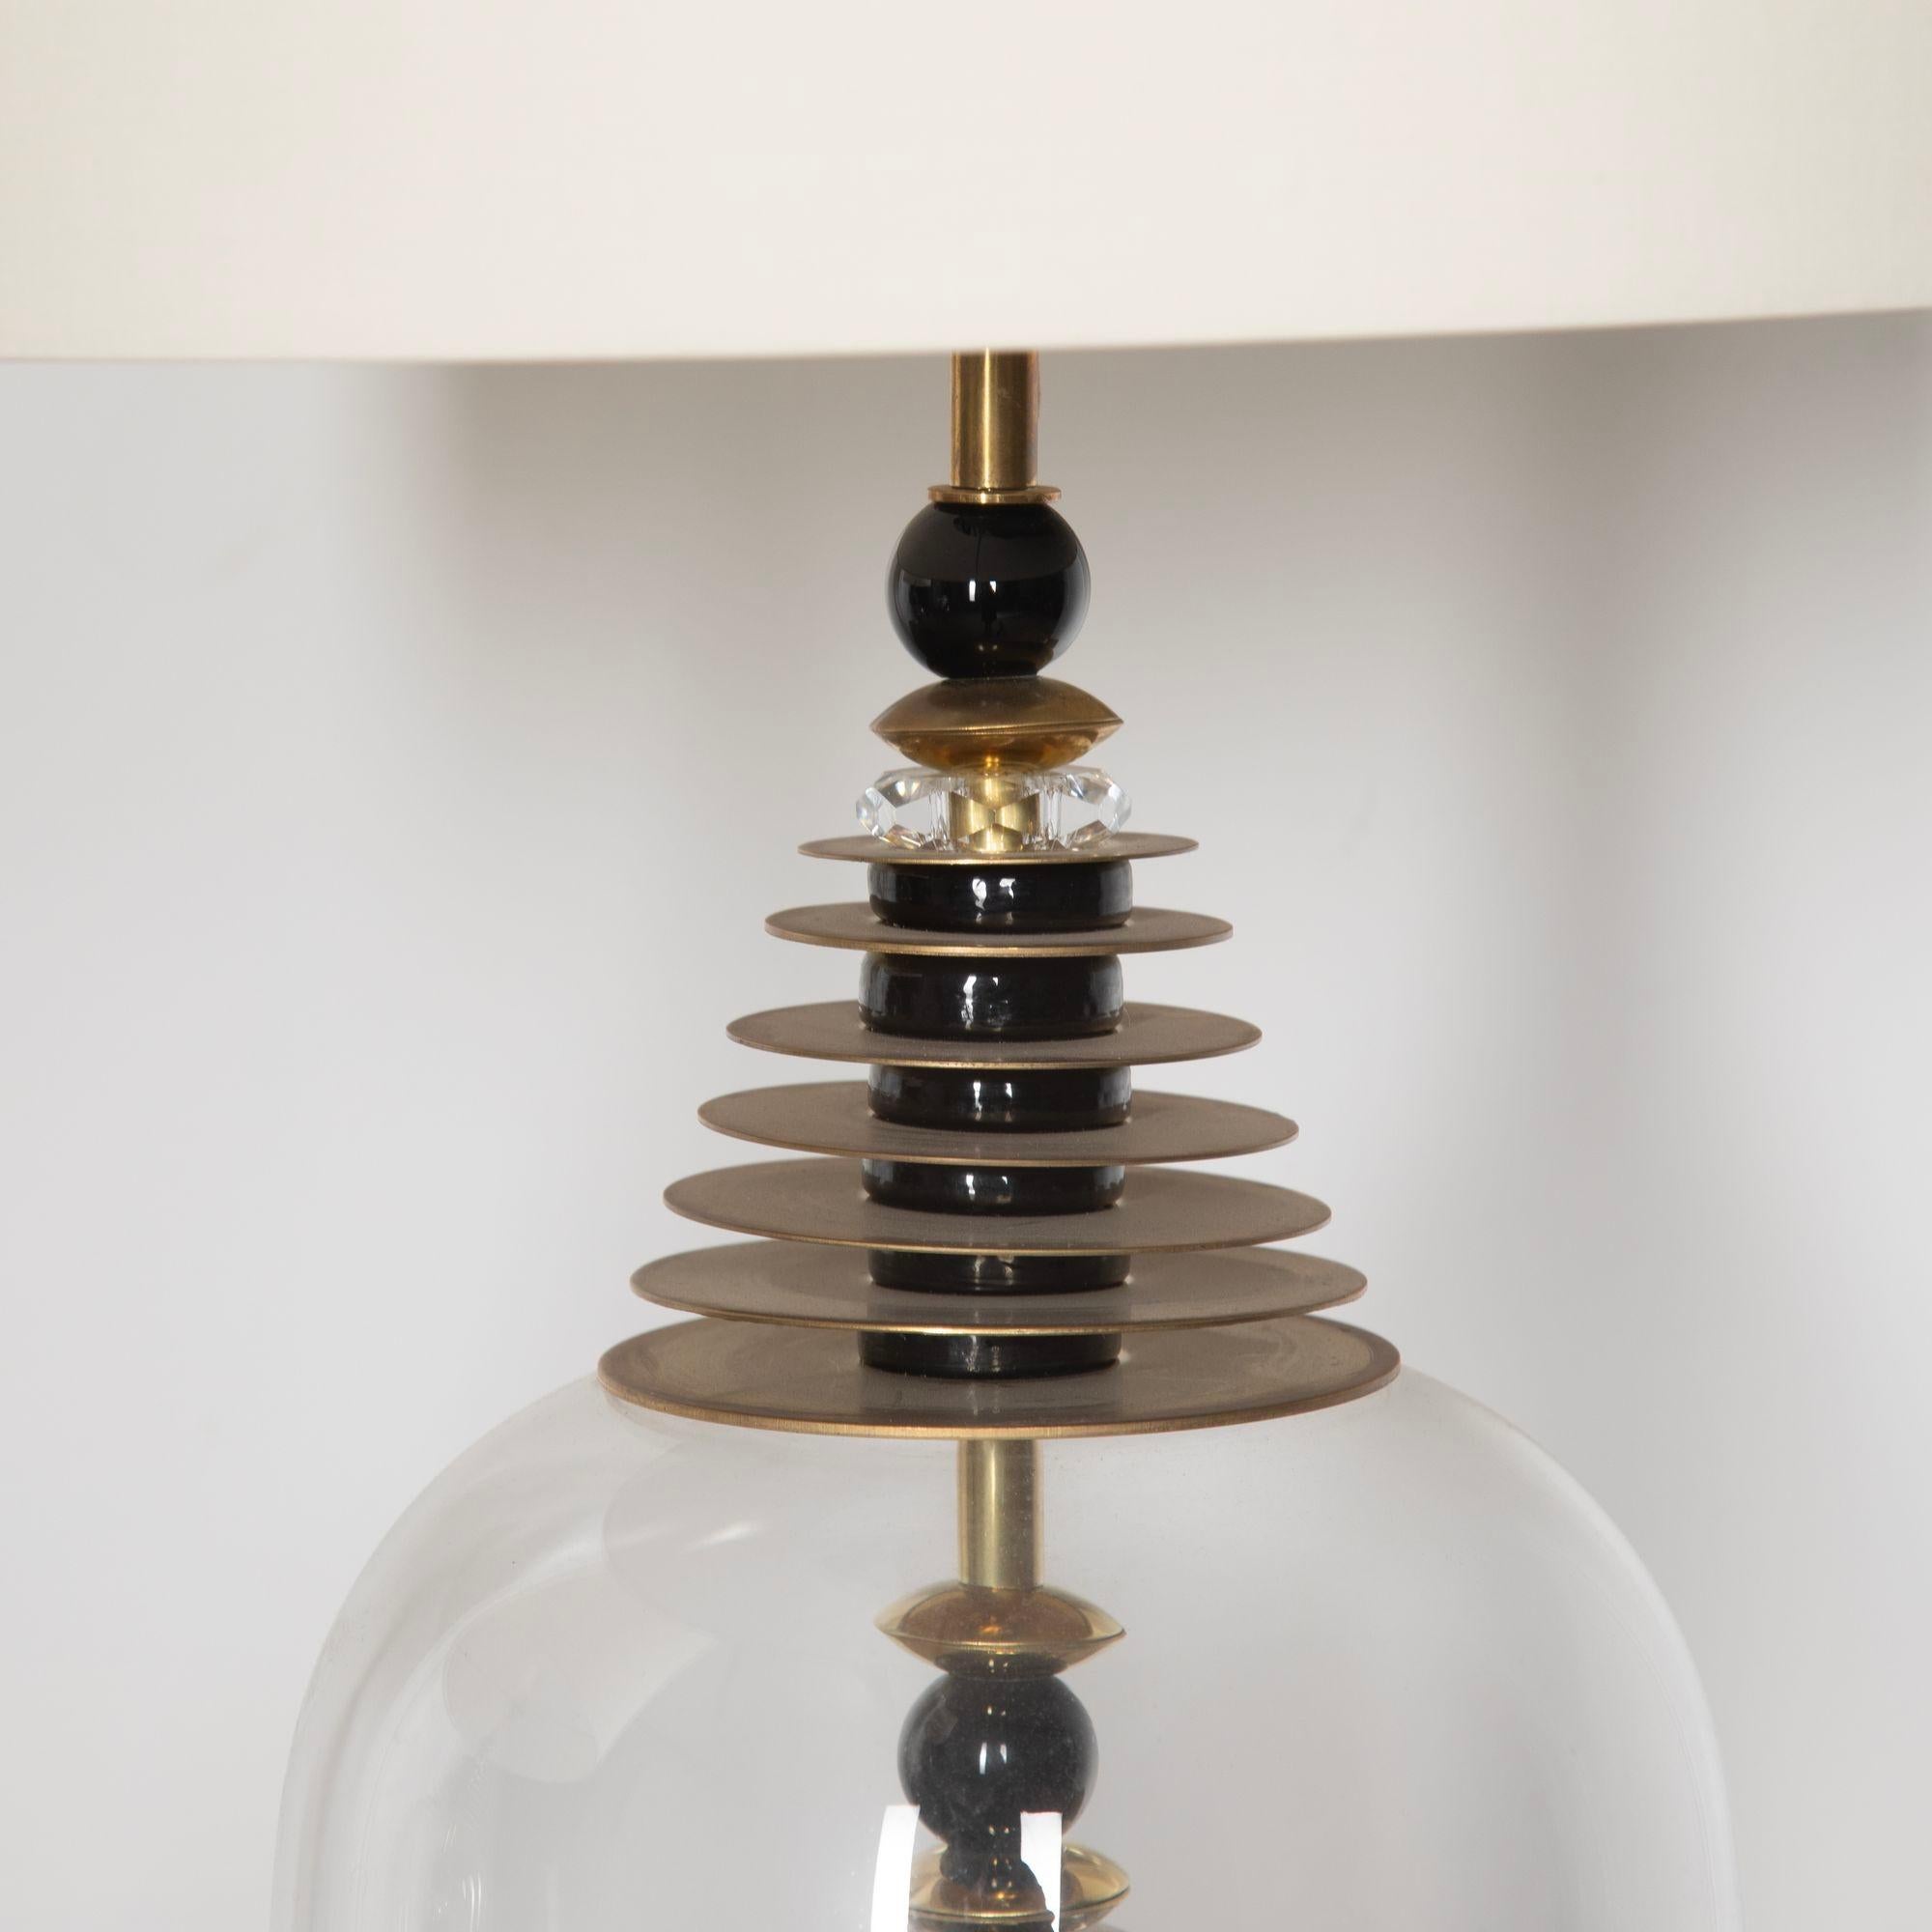 Fabulous contemporary table lamps made from Murano glass.With modern white lampshades, these are a stylish addition to any living space!This item has passed PAT testing according to UK standards.